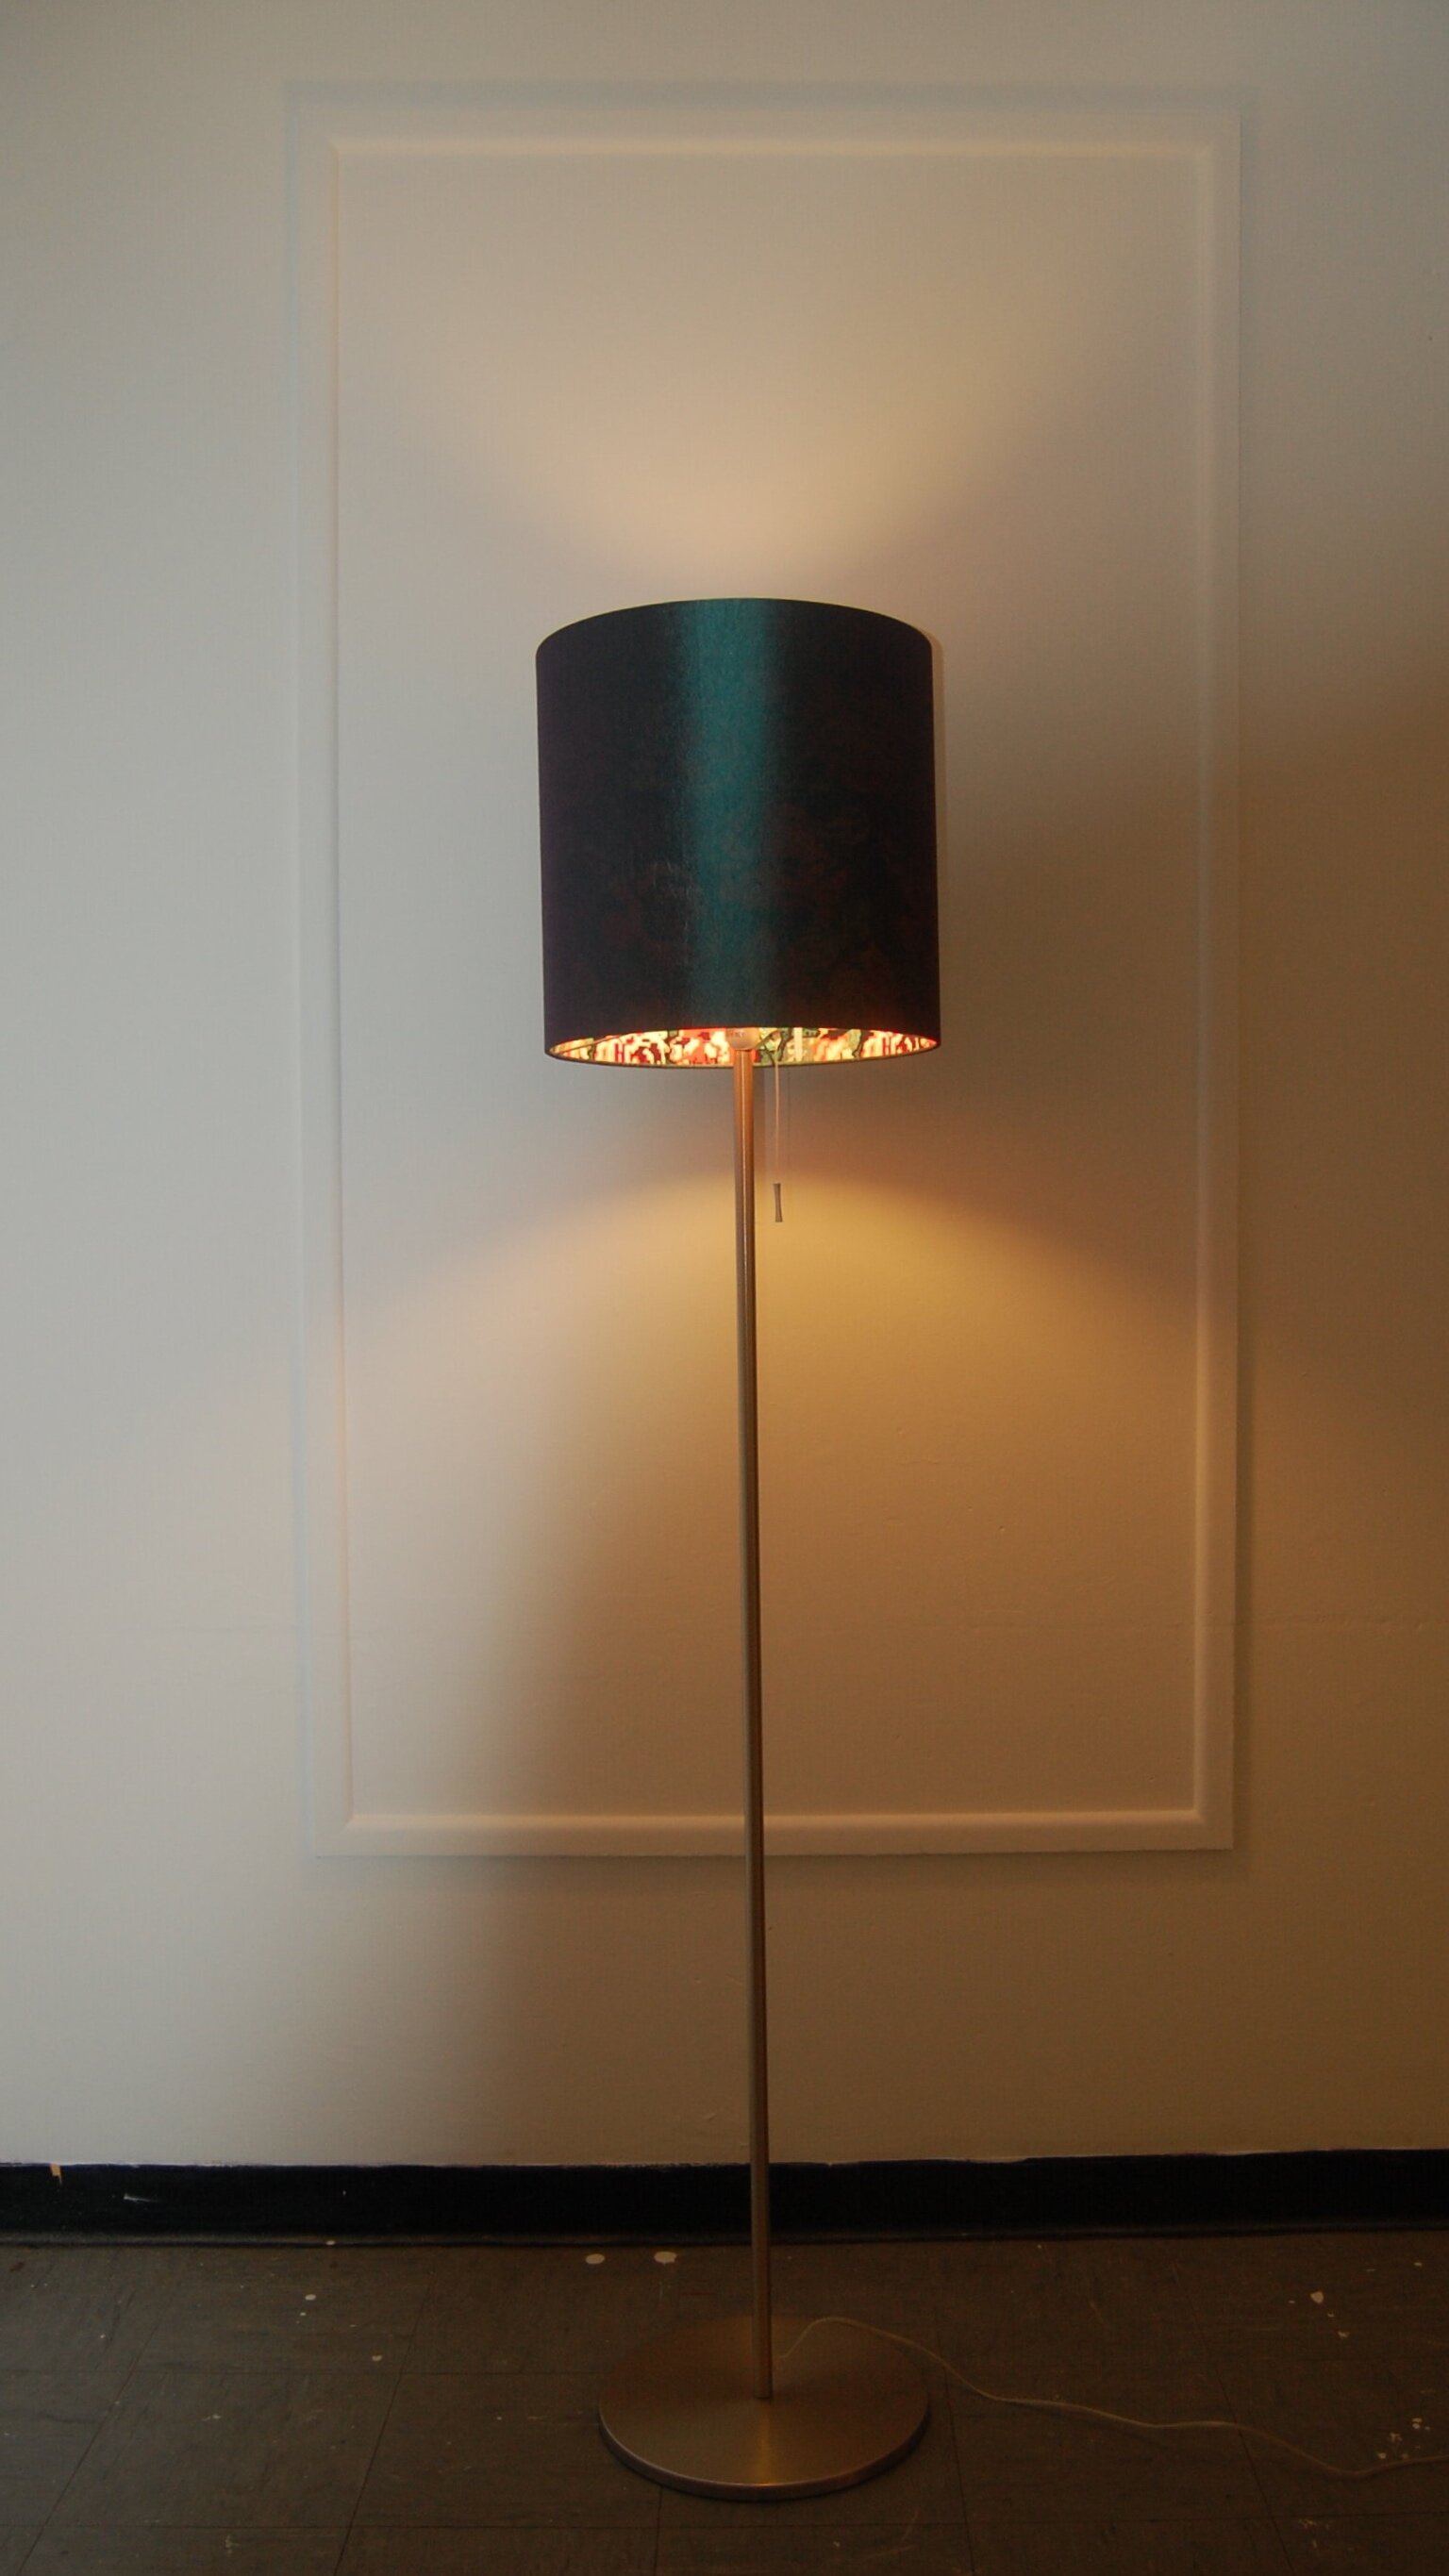 Bespoke Floor Lamp Shades And Standard, Large Lamp Shades For Standard Lamps Uk